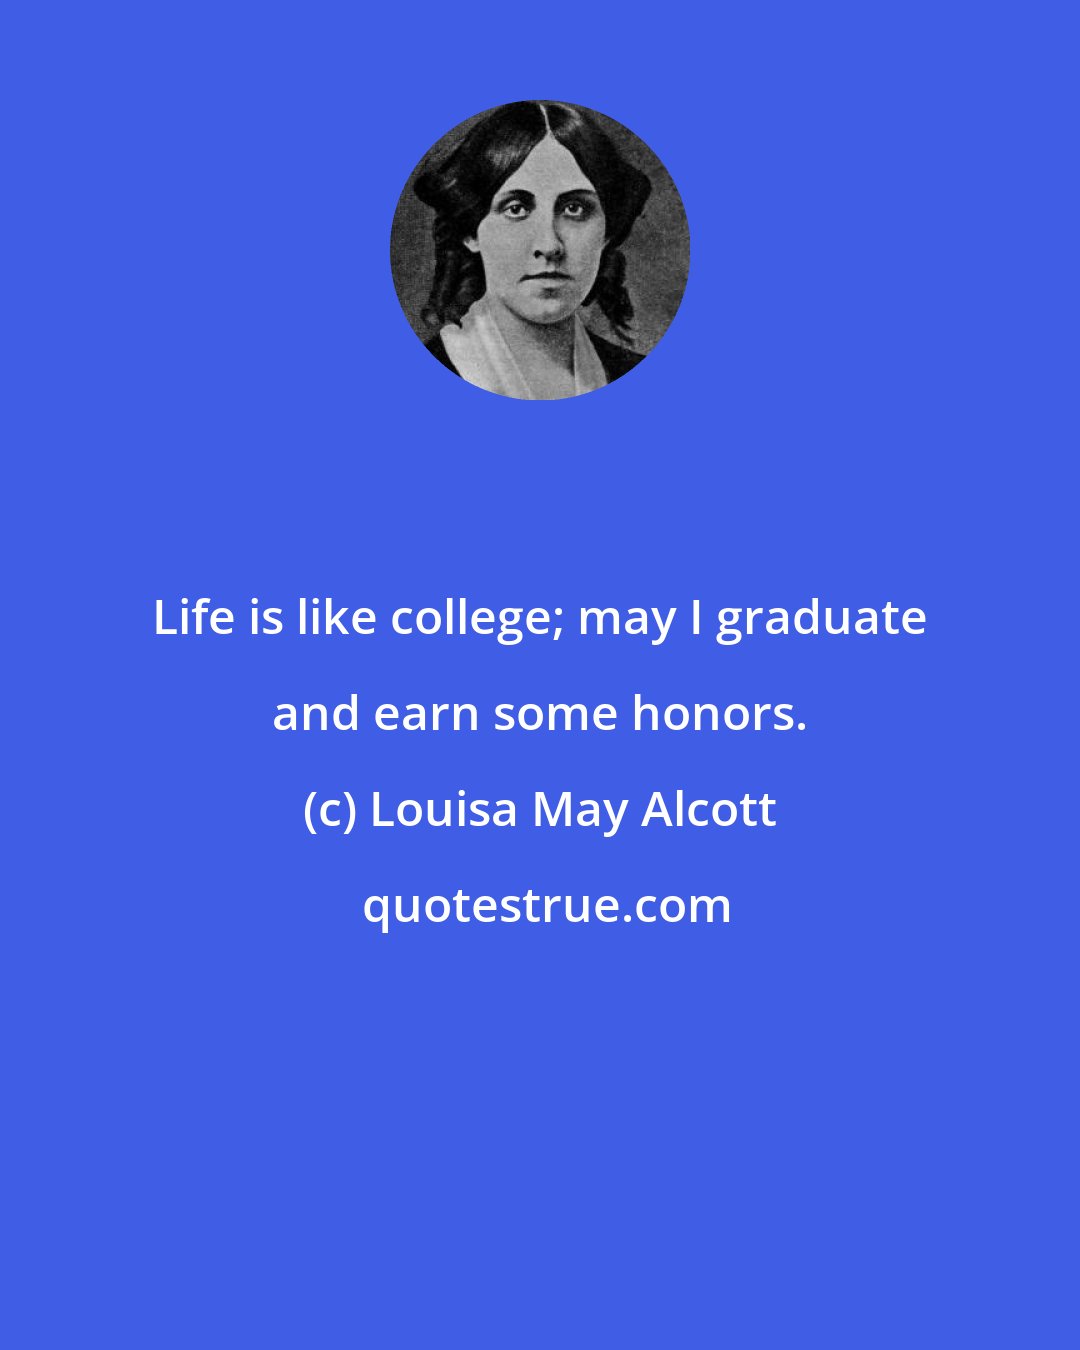 Louisa May Alcott: Life is like college; may I graduate and earn some honors.